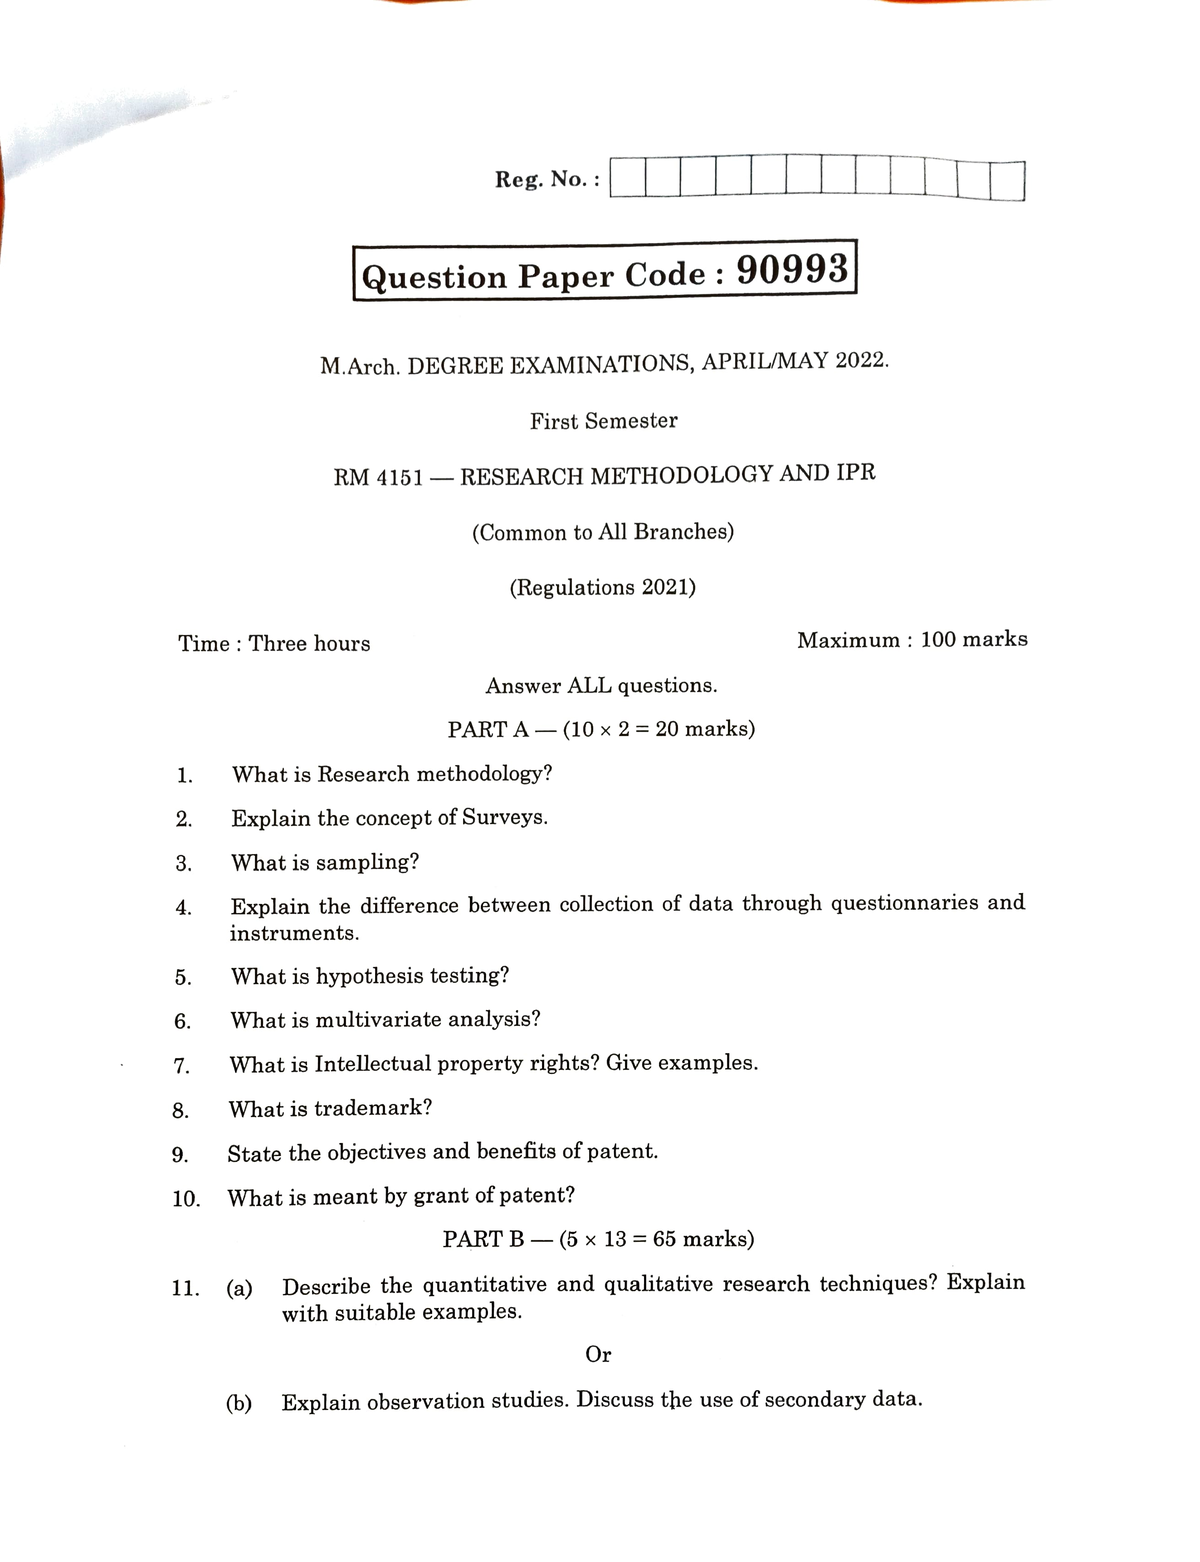 rm4151 research methodology and ipr question paper